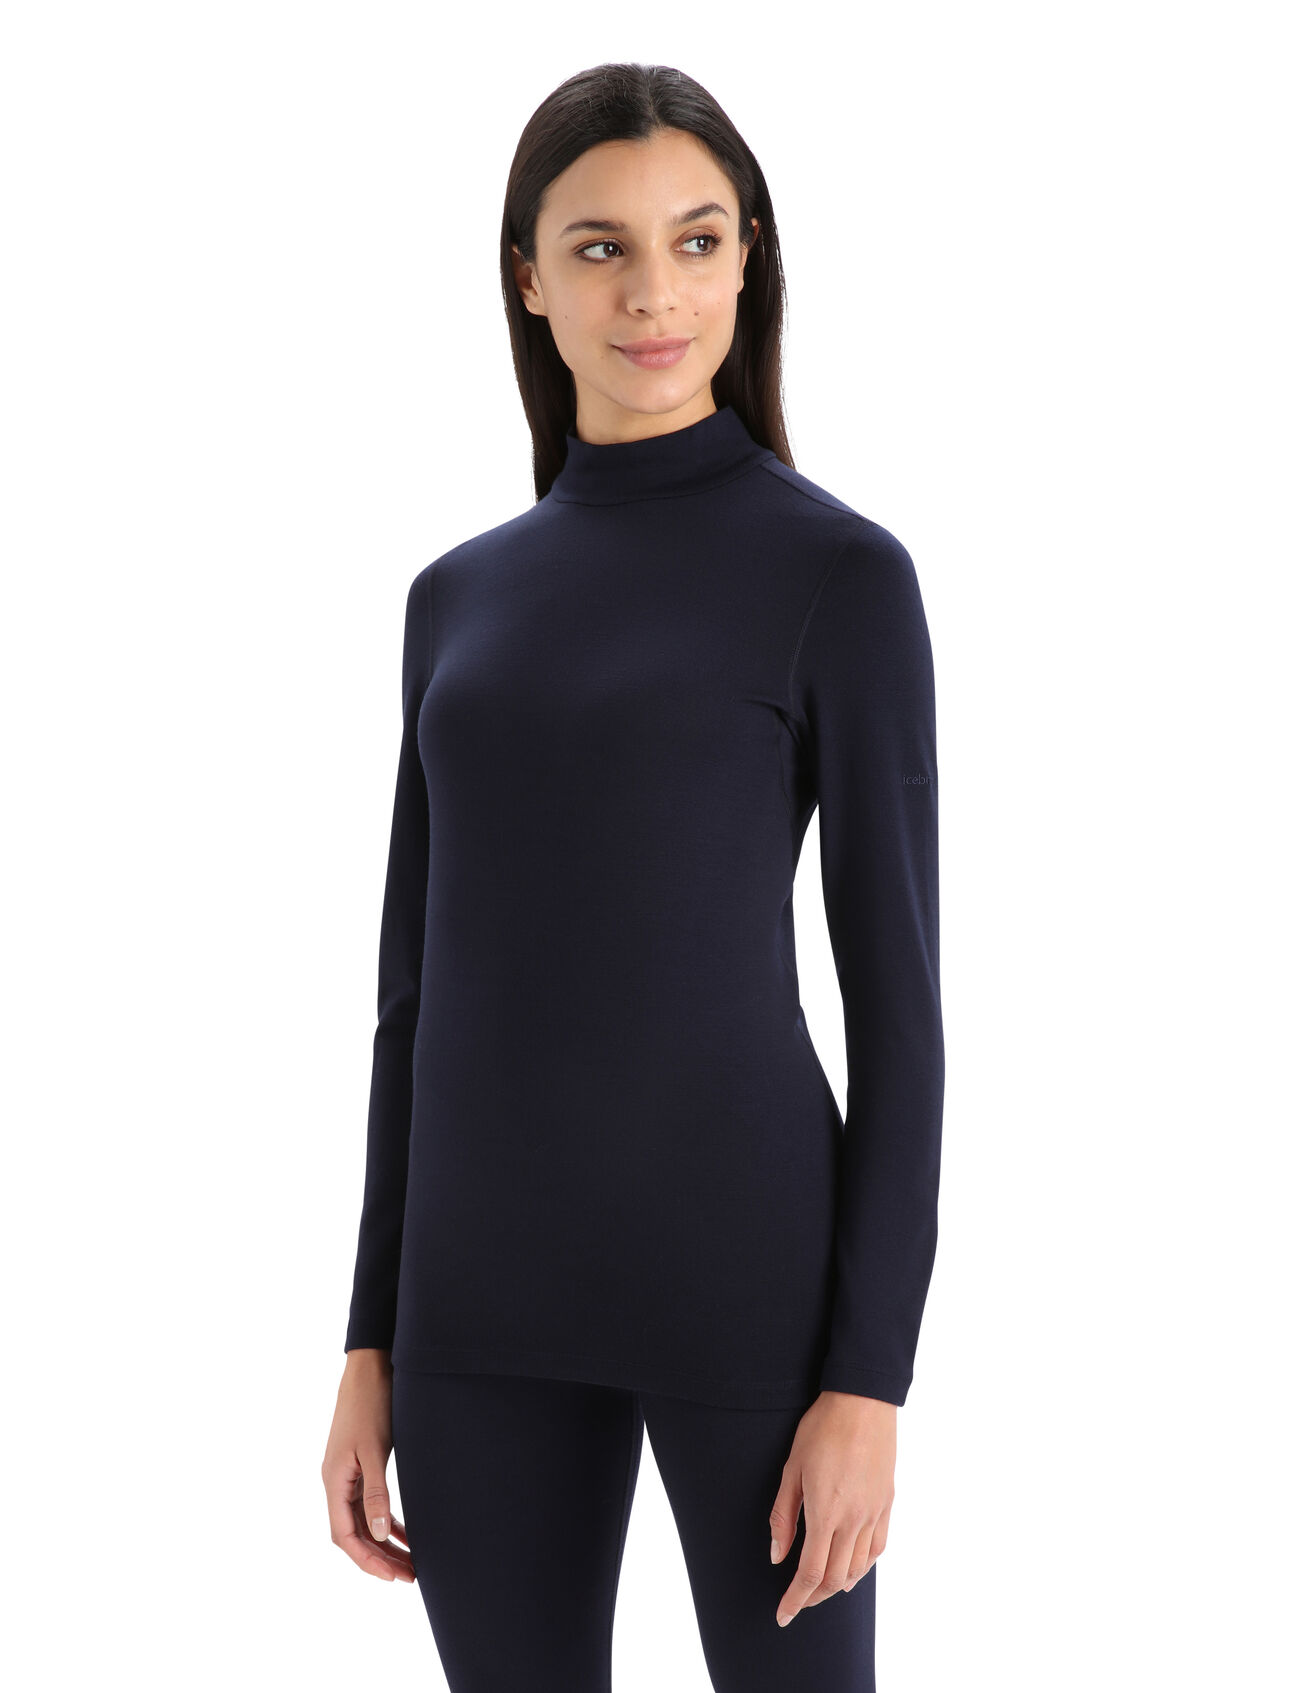 Womens Merino 260 Tech Long Sleeve Turtleneck Thermal Top An incredibly warm merino base layer for the coldest months of the year, the 260 Tech Long Sleeve Turtleneck is a go-to piece for winter layering—ideal for skiing, snowshoeing and other cold-weather pursuits.